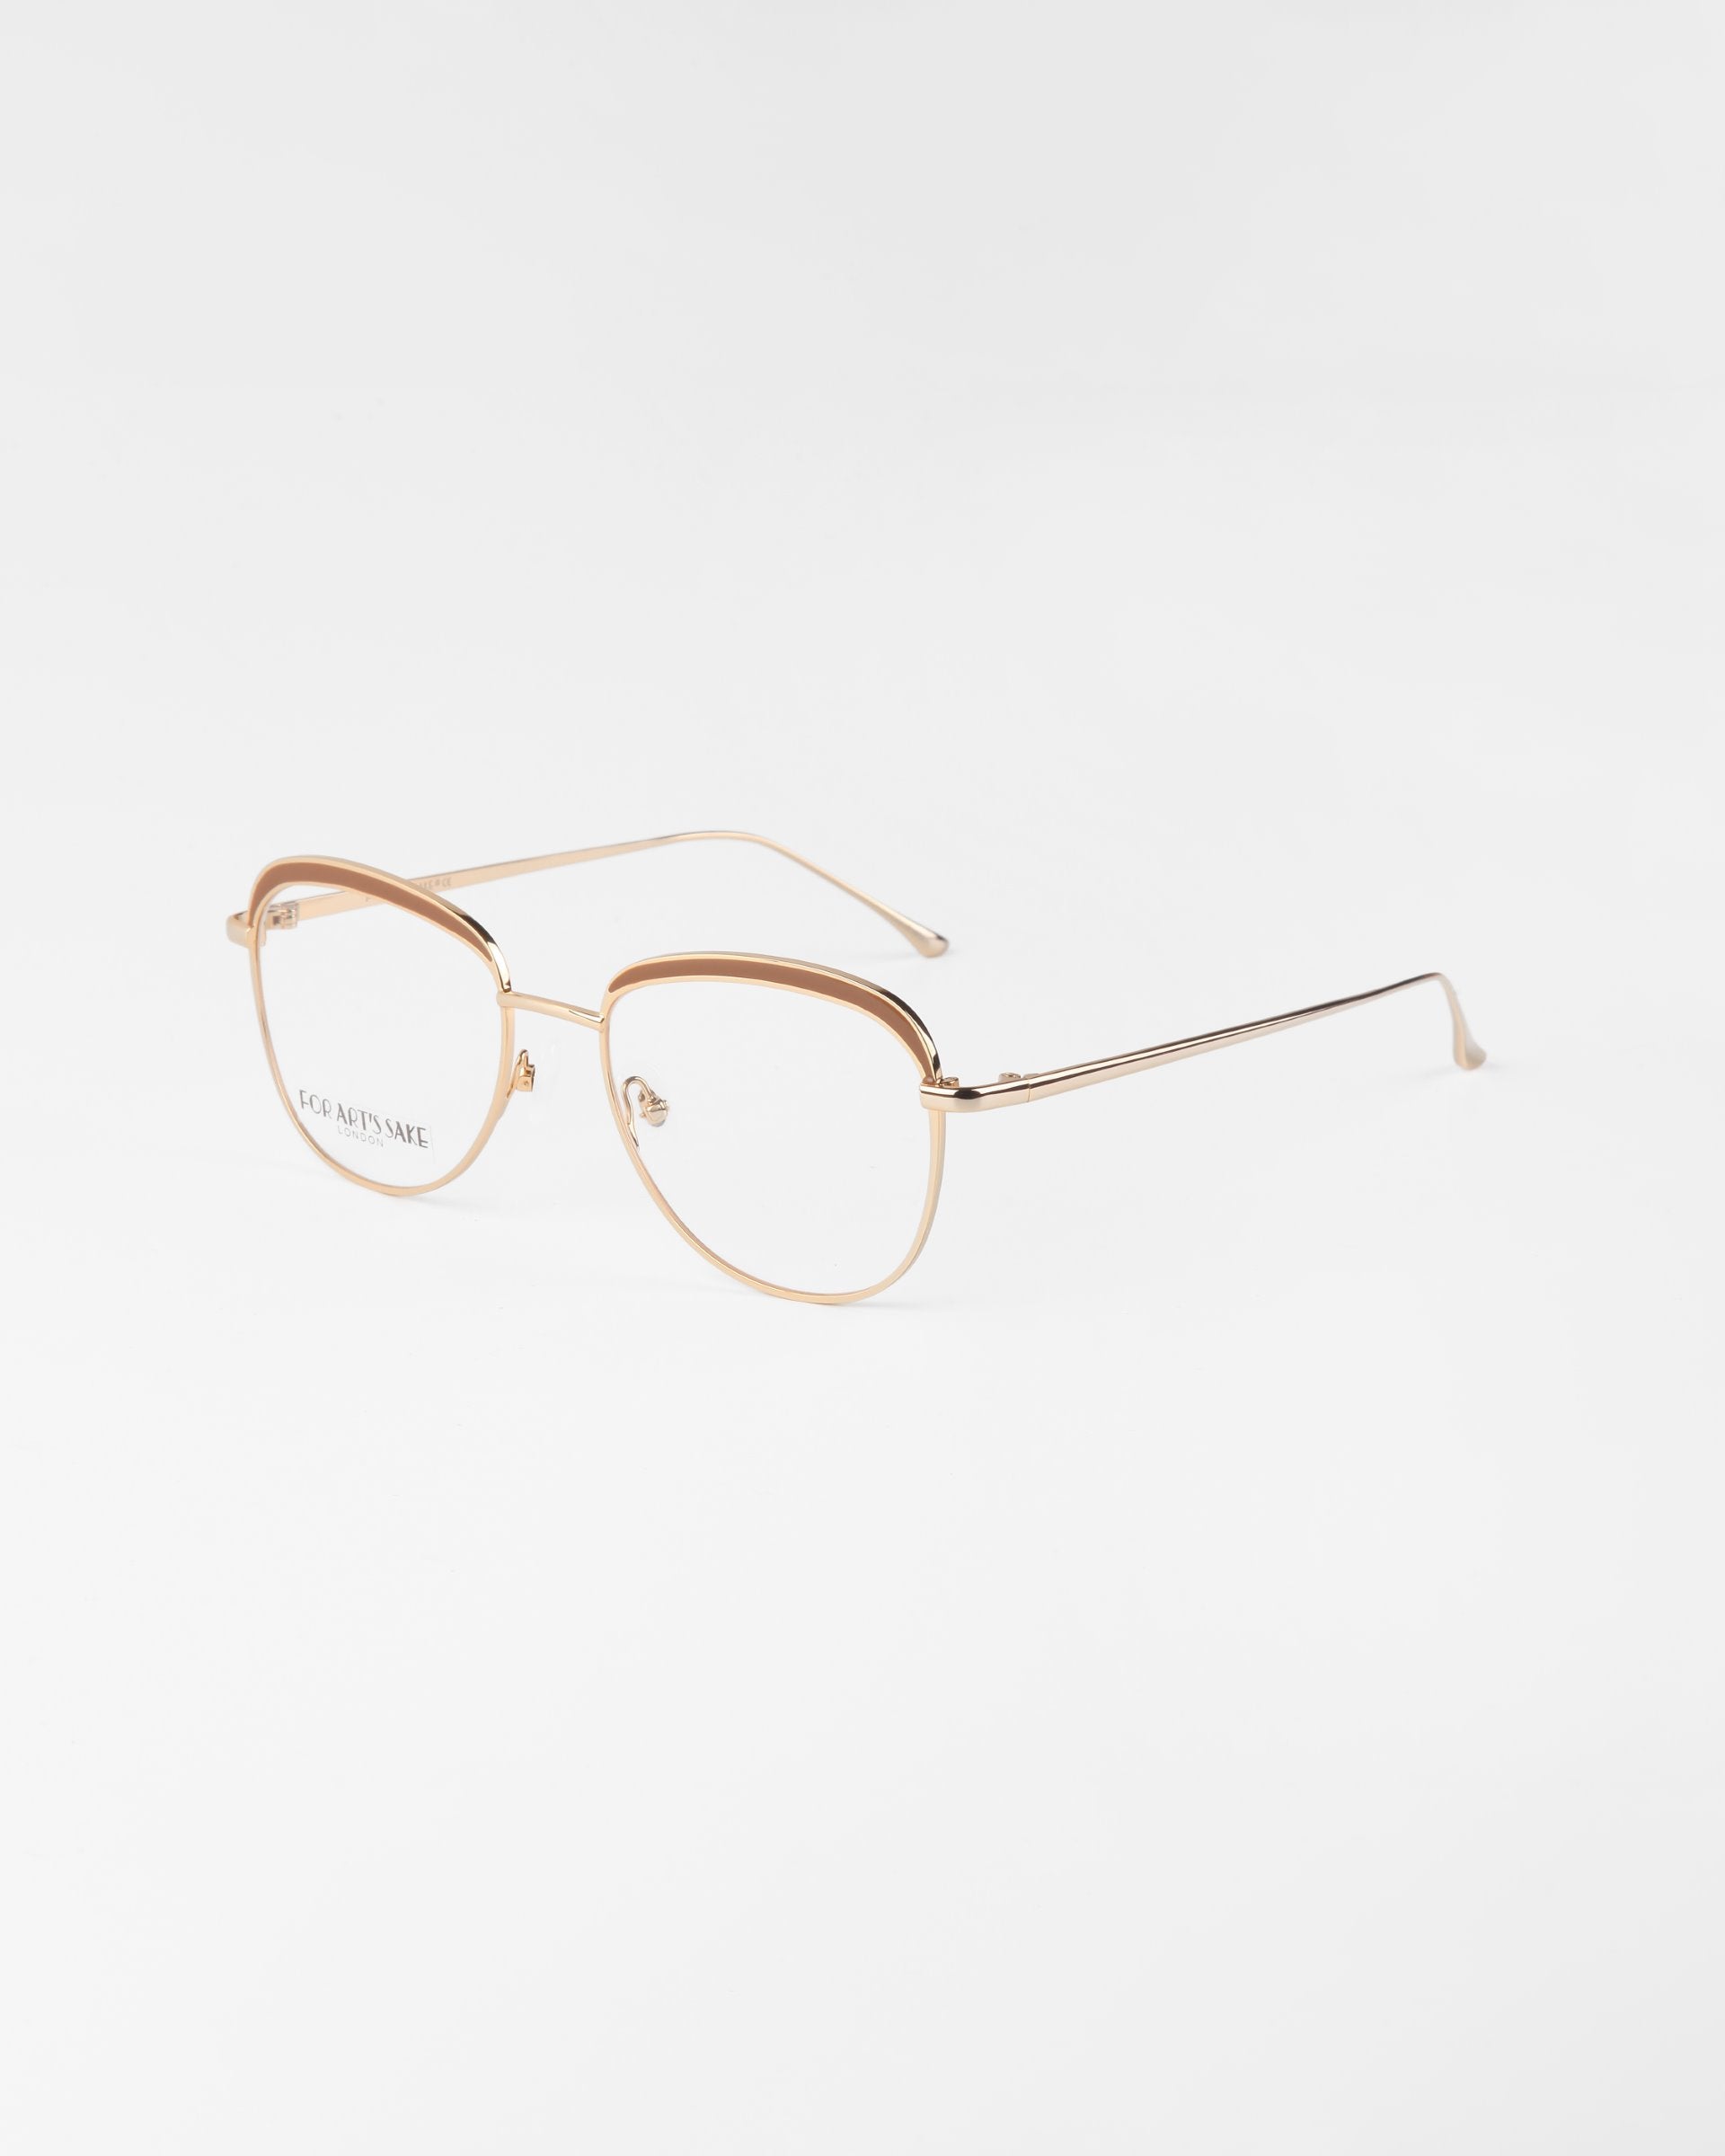 A pair of For Art&#39;s Sake® Smoothie golden, wireframe glasses with clear lenses and 18-karat gold plating. The frames are lightly structured with subtle design elements, offering elegant simplicity. The background is a plain white surface, emphasizing the refined details of these stylish glasses.